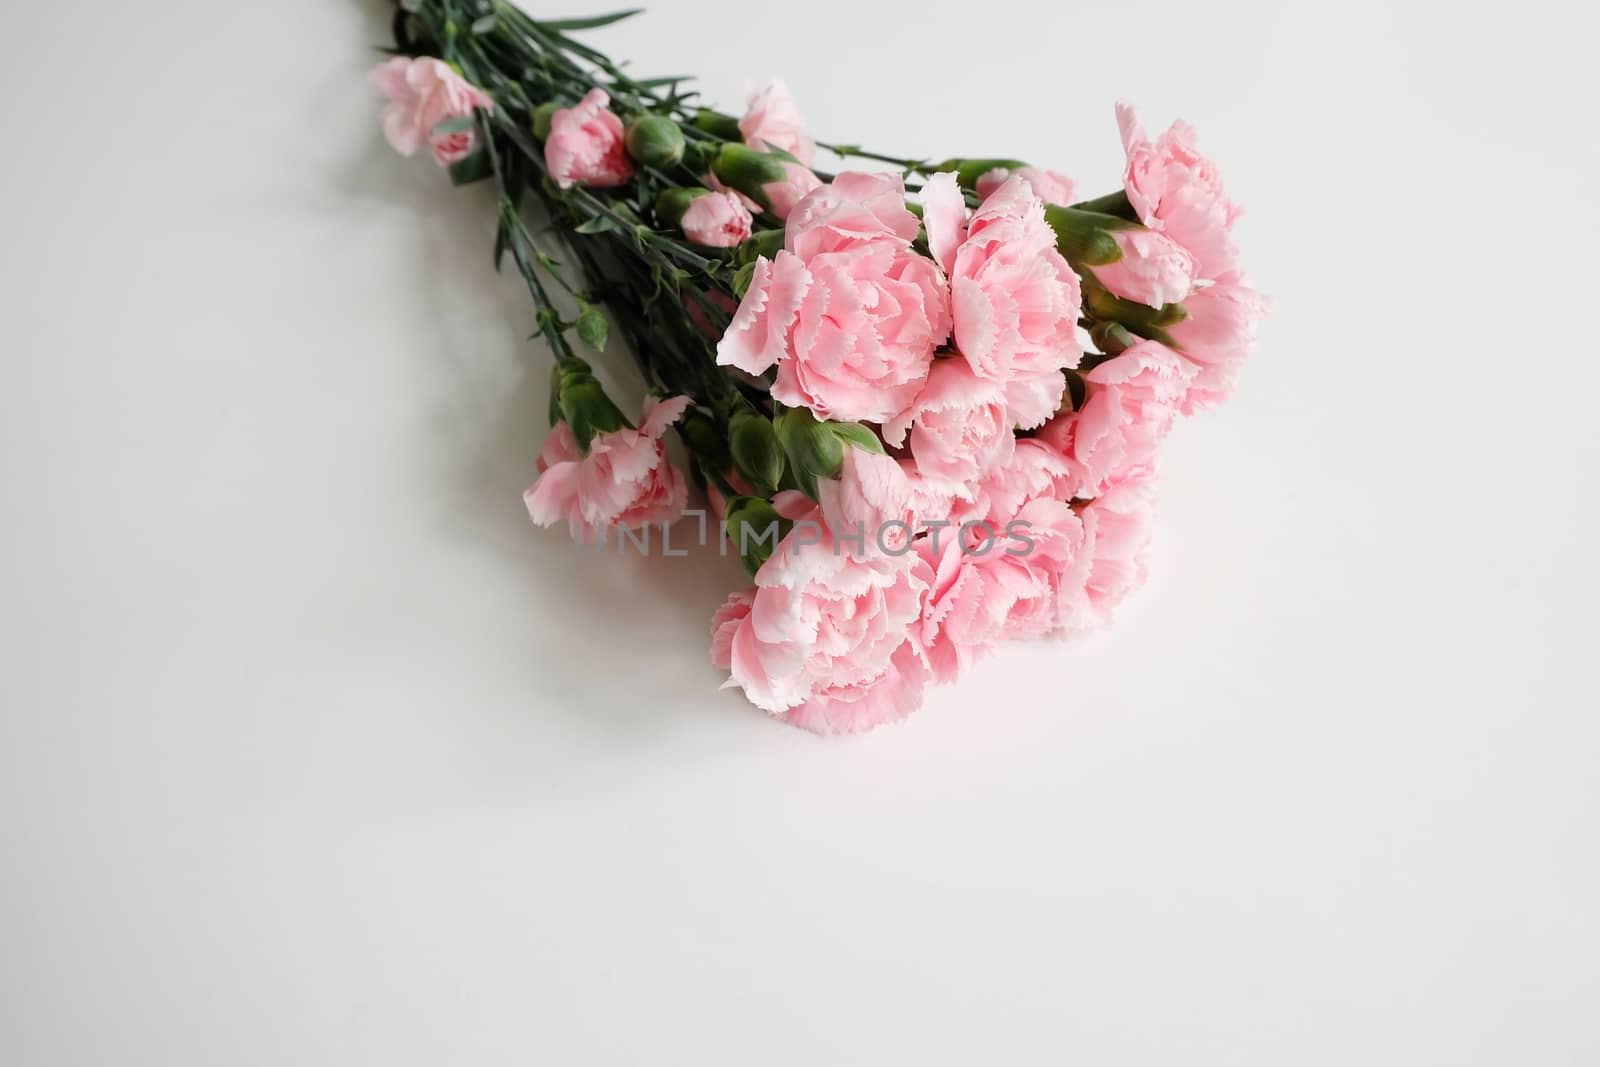 Bouquet of carnations by mmm